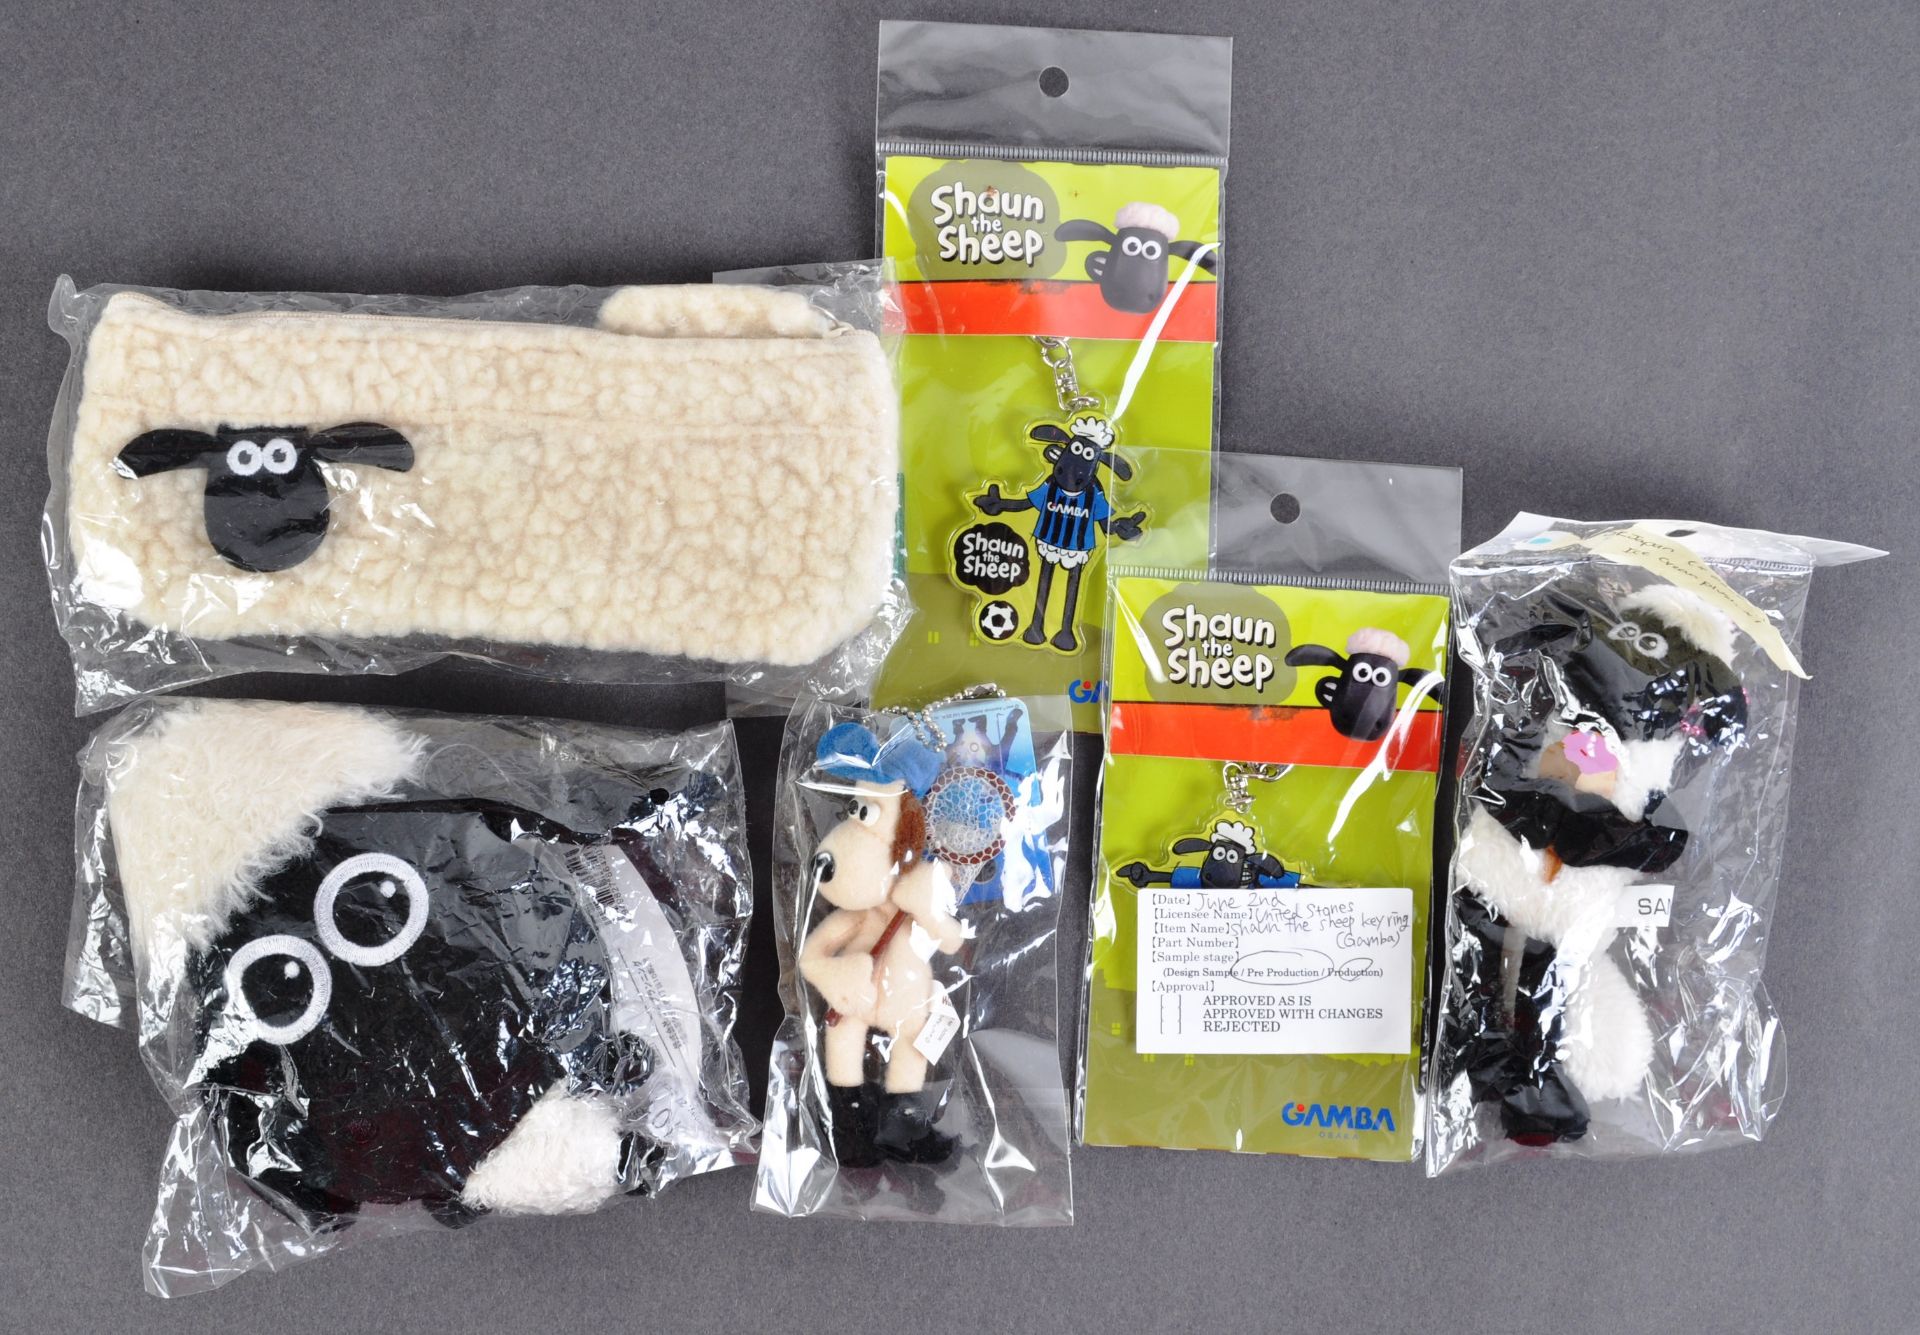 COLLECTION OF AARDMAN ANIMATIONS JAPANESE IMPORT ITEMS